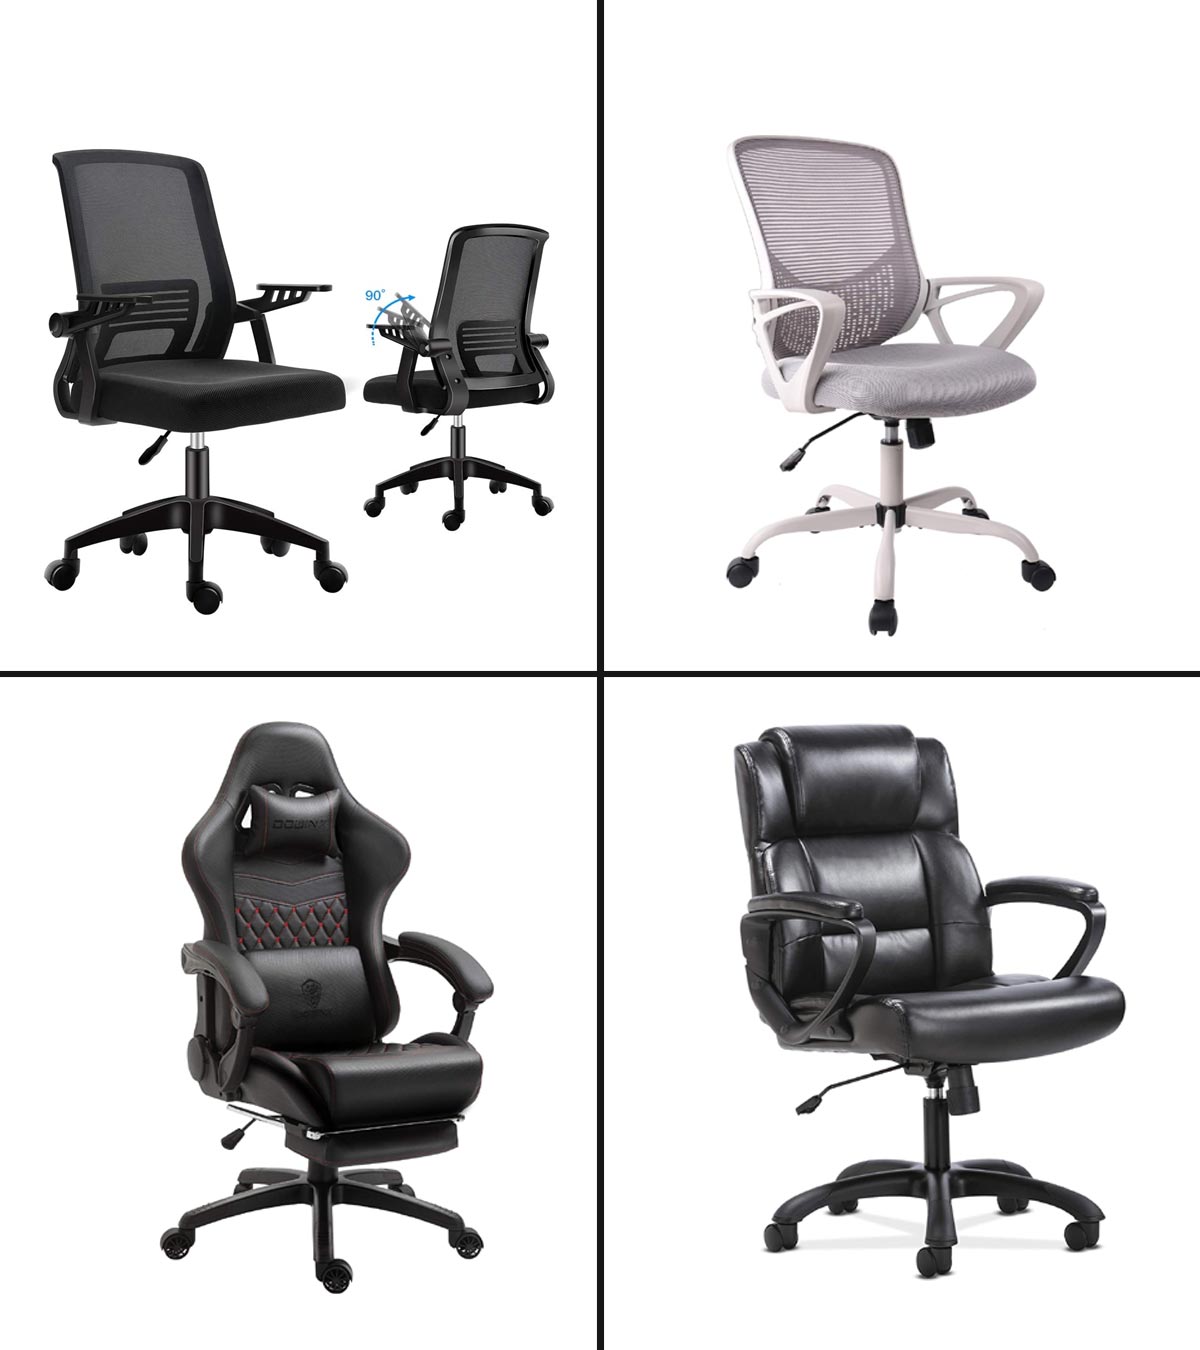 Best Office Chairs for Hip Pain (These are Just Better) - Ergonomic Trends